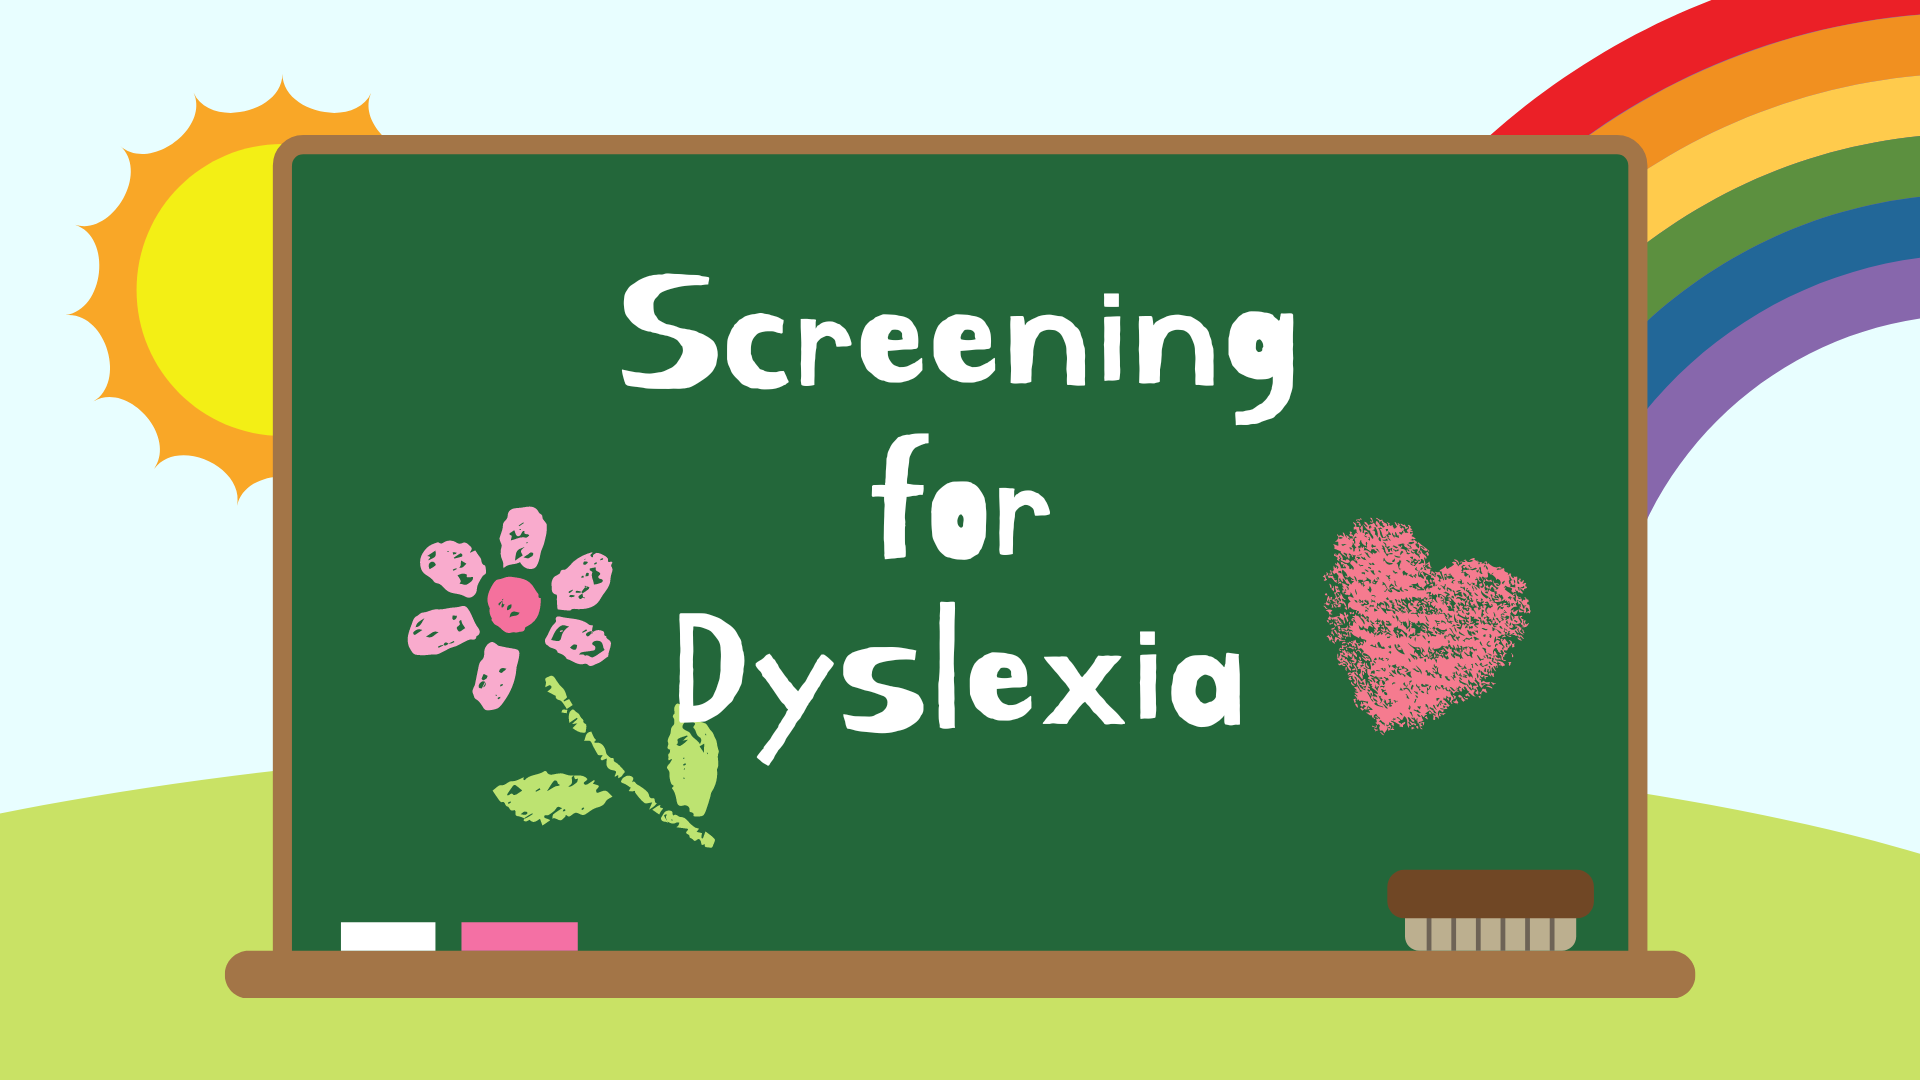 Screening for Dyslexia on a background of a chalk board with rainbow.